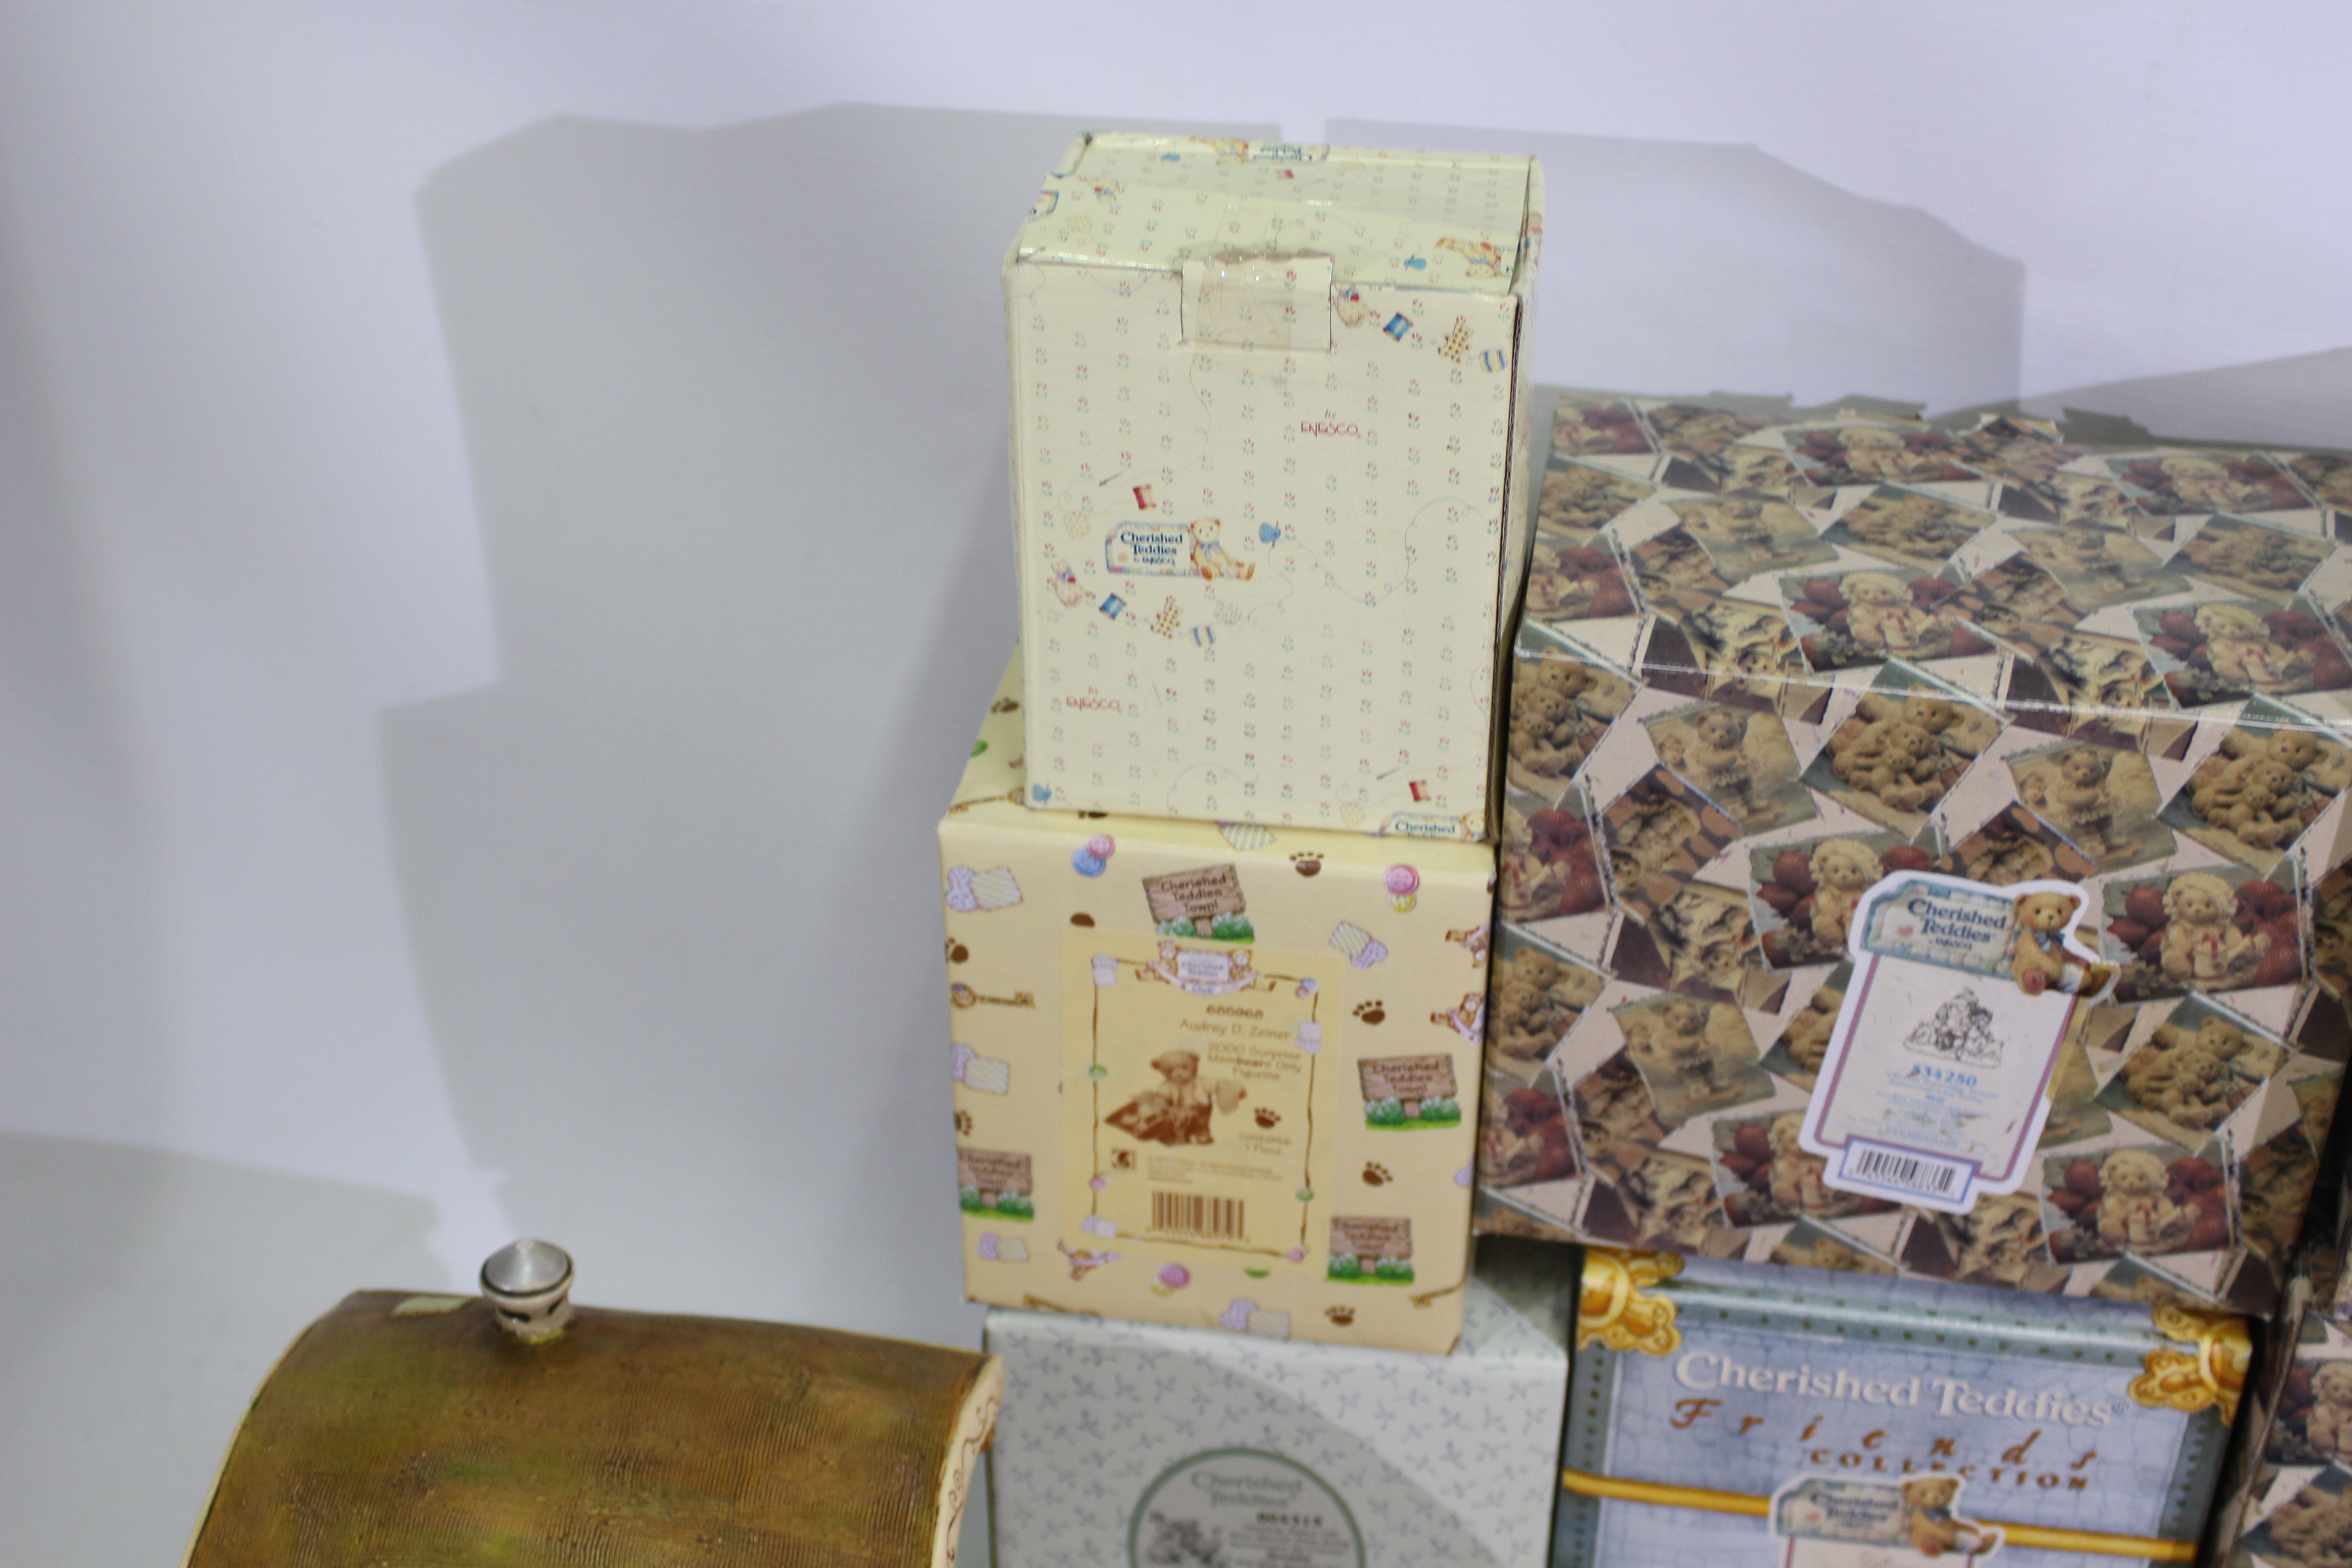 Pendelfin, Cherished Teddies - A collect - Image 5 of 5